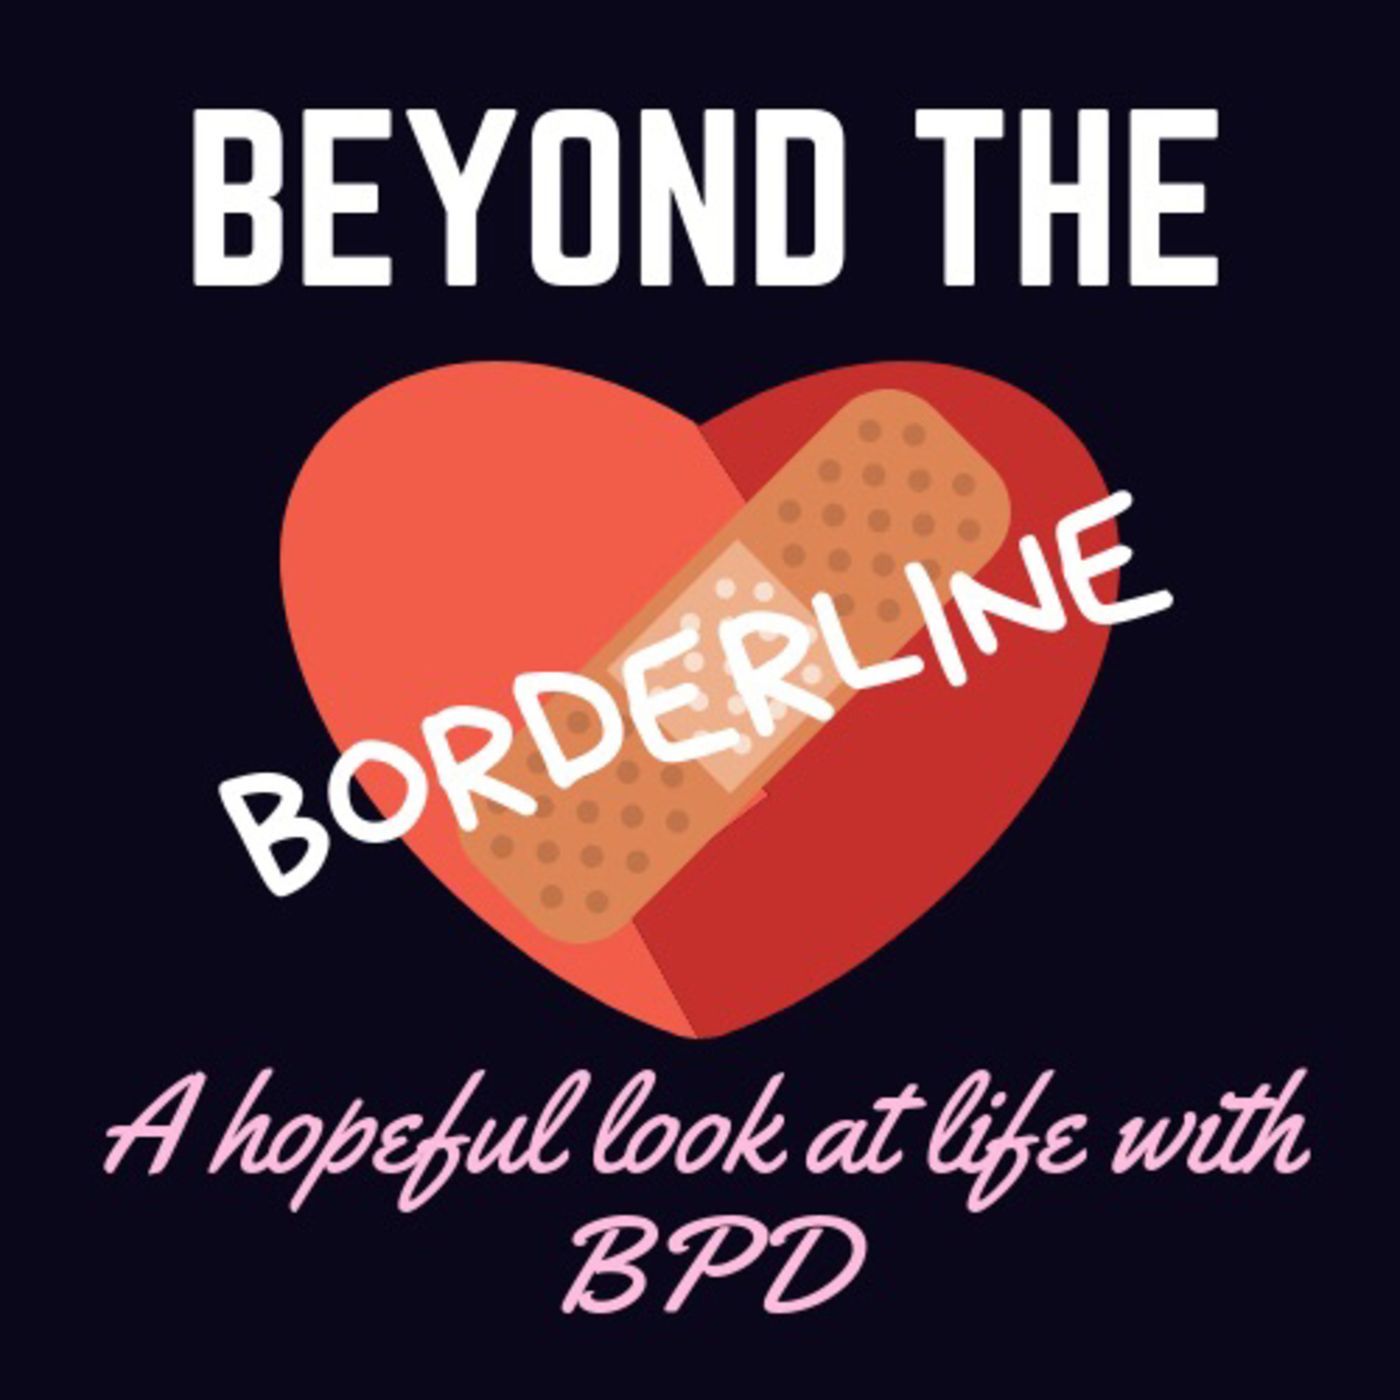 Beyond the Borderline - “A Matter of Laugh or Death” - an interview with suicide prevention advocate Frank King